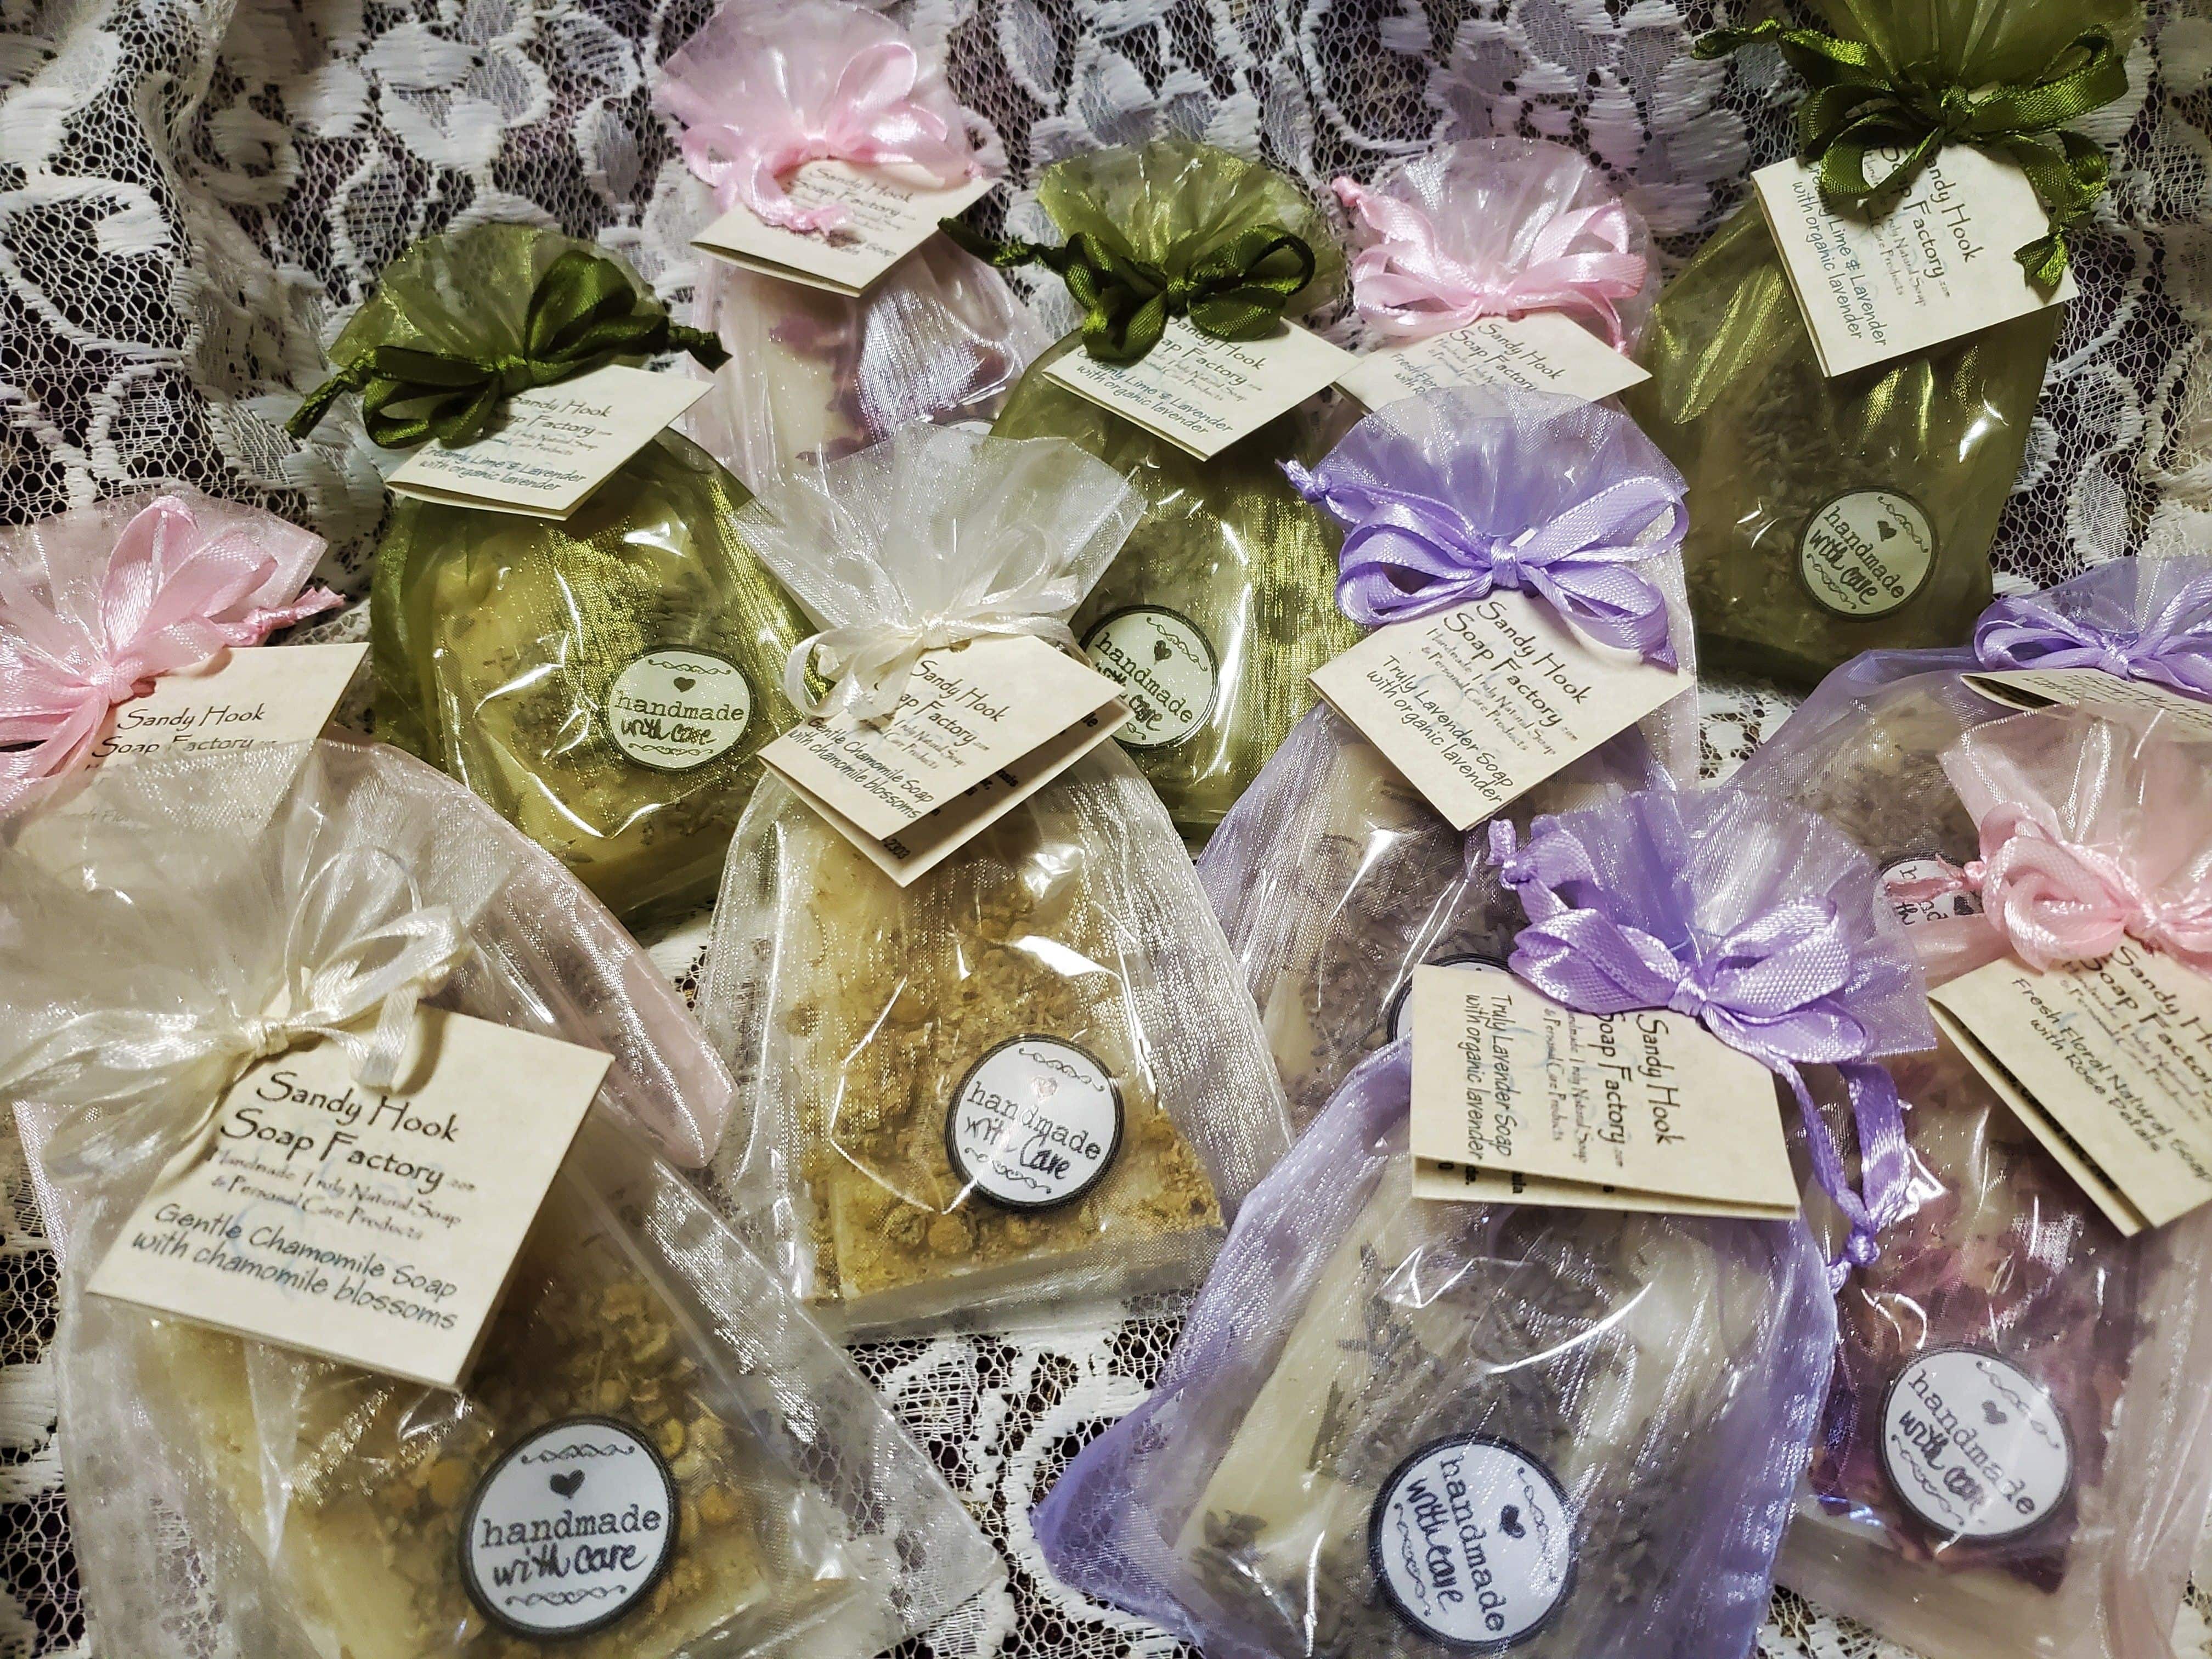 We make beautiful little soap favour gifts with organic botanicals for all occasions including shower and wedding favours.  Handmade with care in Manitoba.